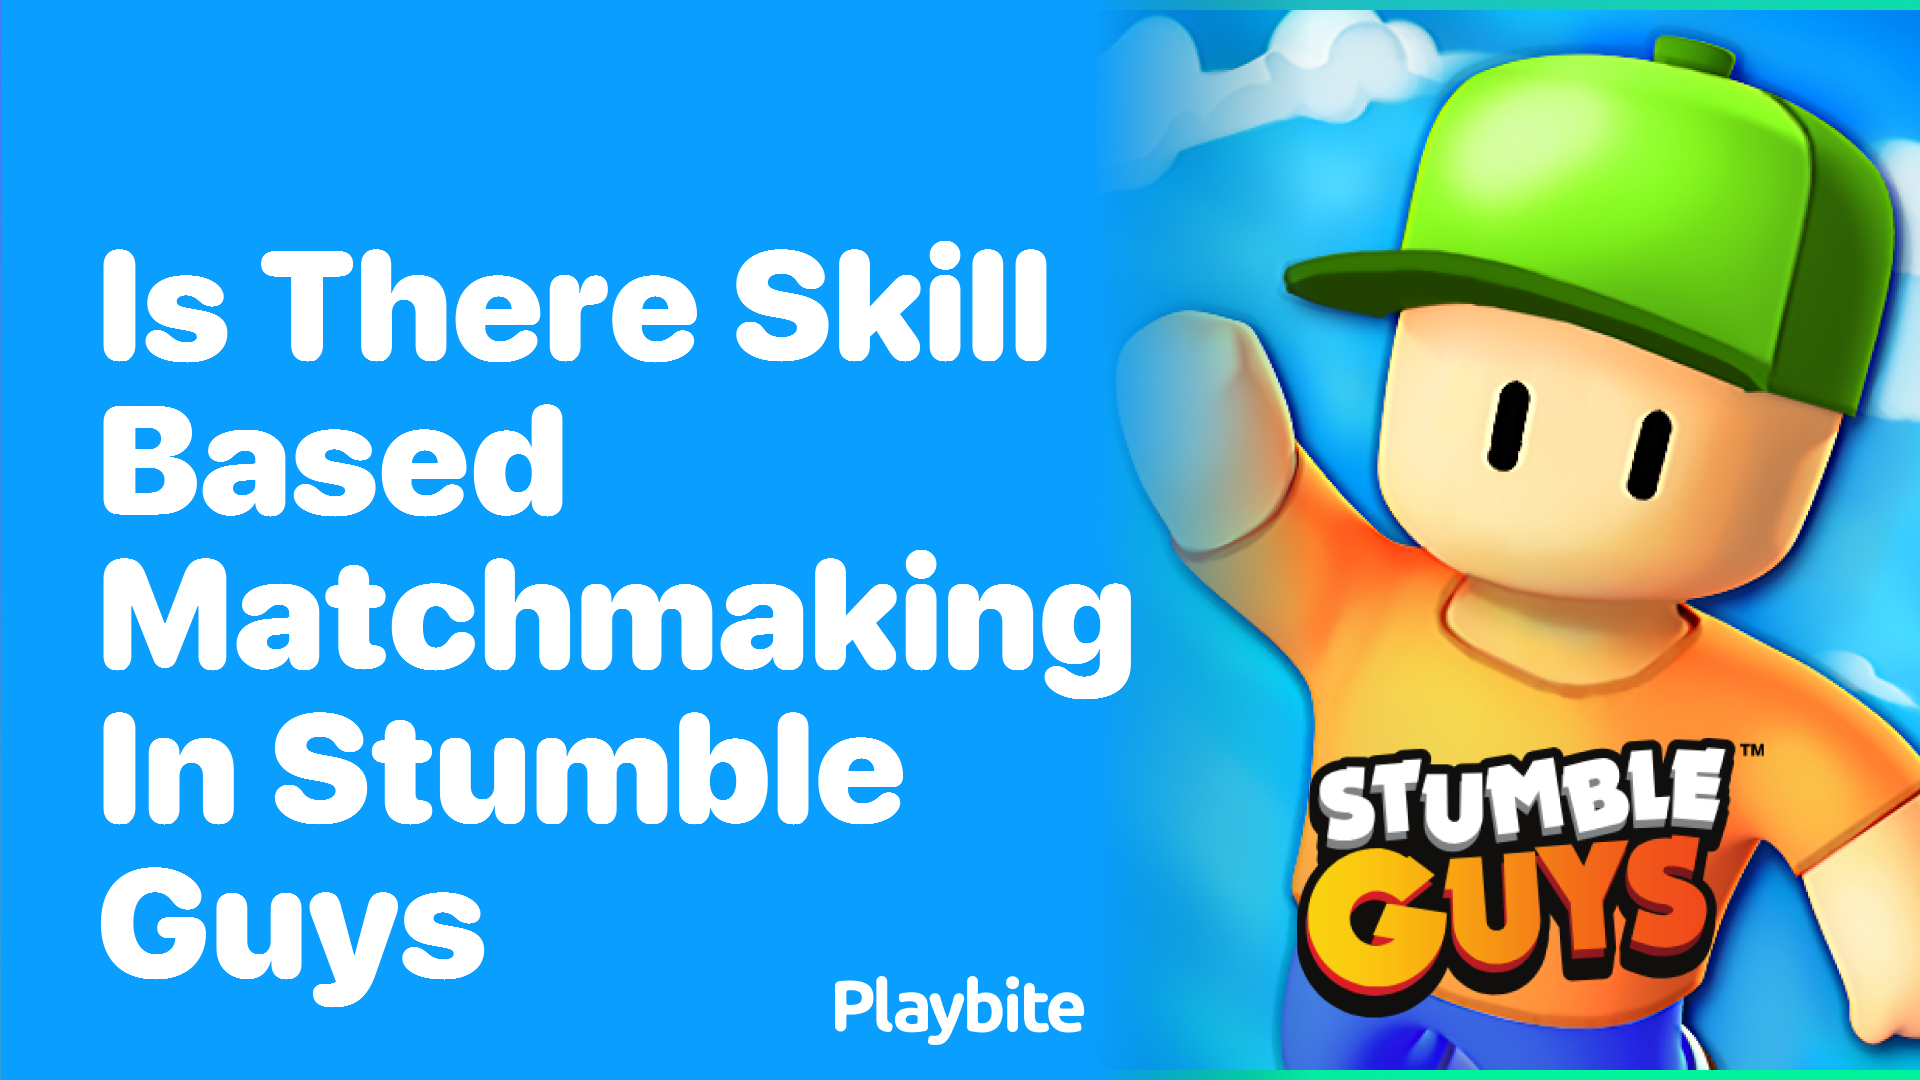 Is There Skill-Based Matchmaking in Stumble Guys?